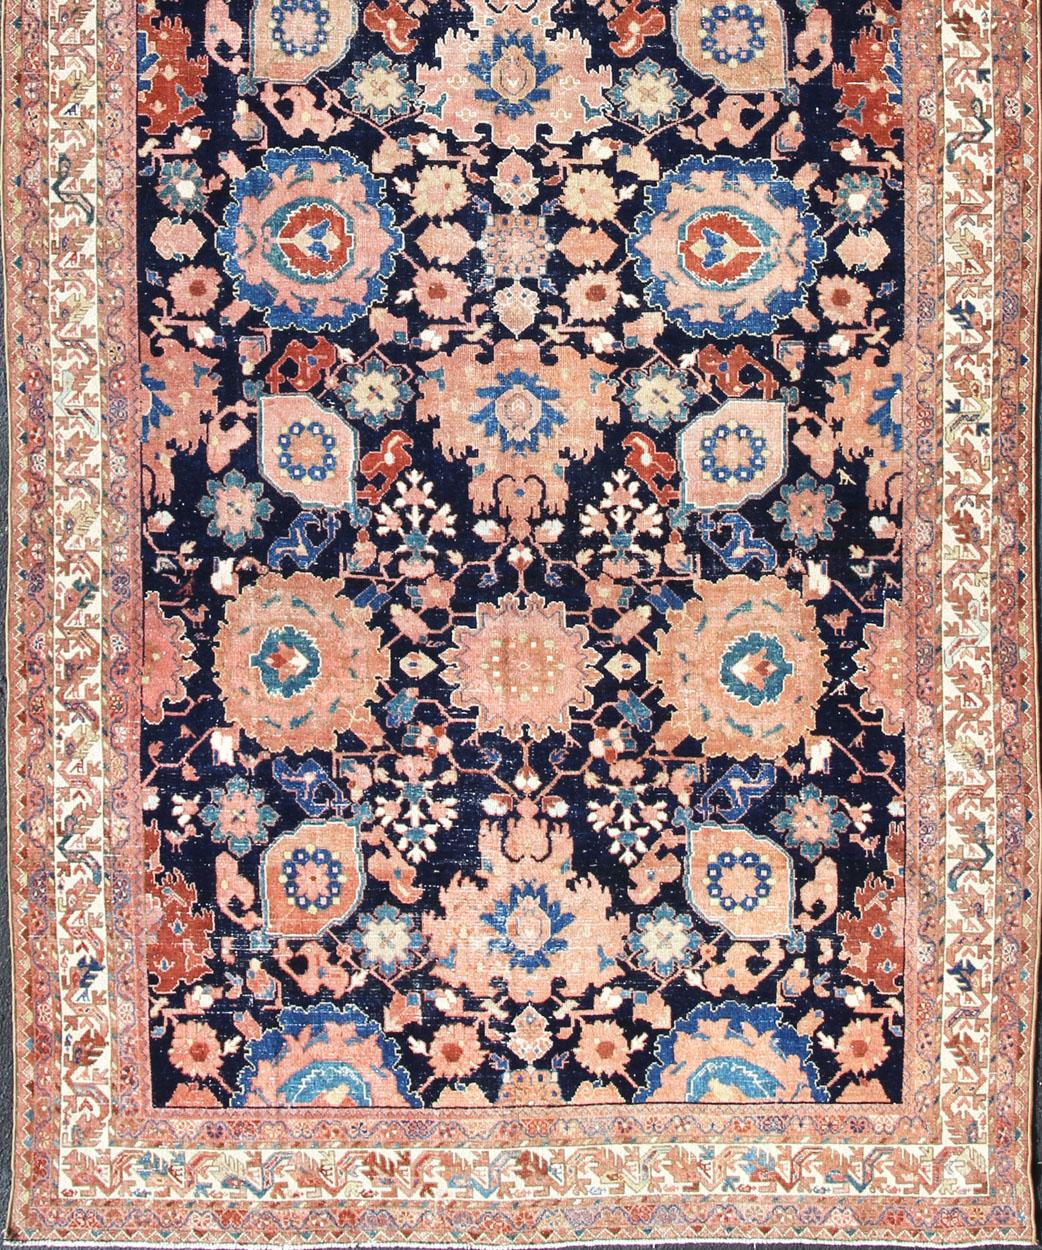 Persian Malayer with navy blue and peach with all-over design. Rug/R20-107
This antique Persian Malayer rugs traditional pattern with proportions, colors and motifs uniquely suited to Western tastes and interiors. This Persian rug displays a navy